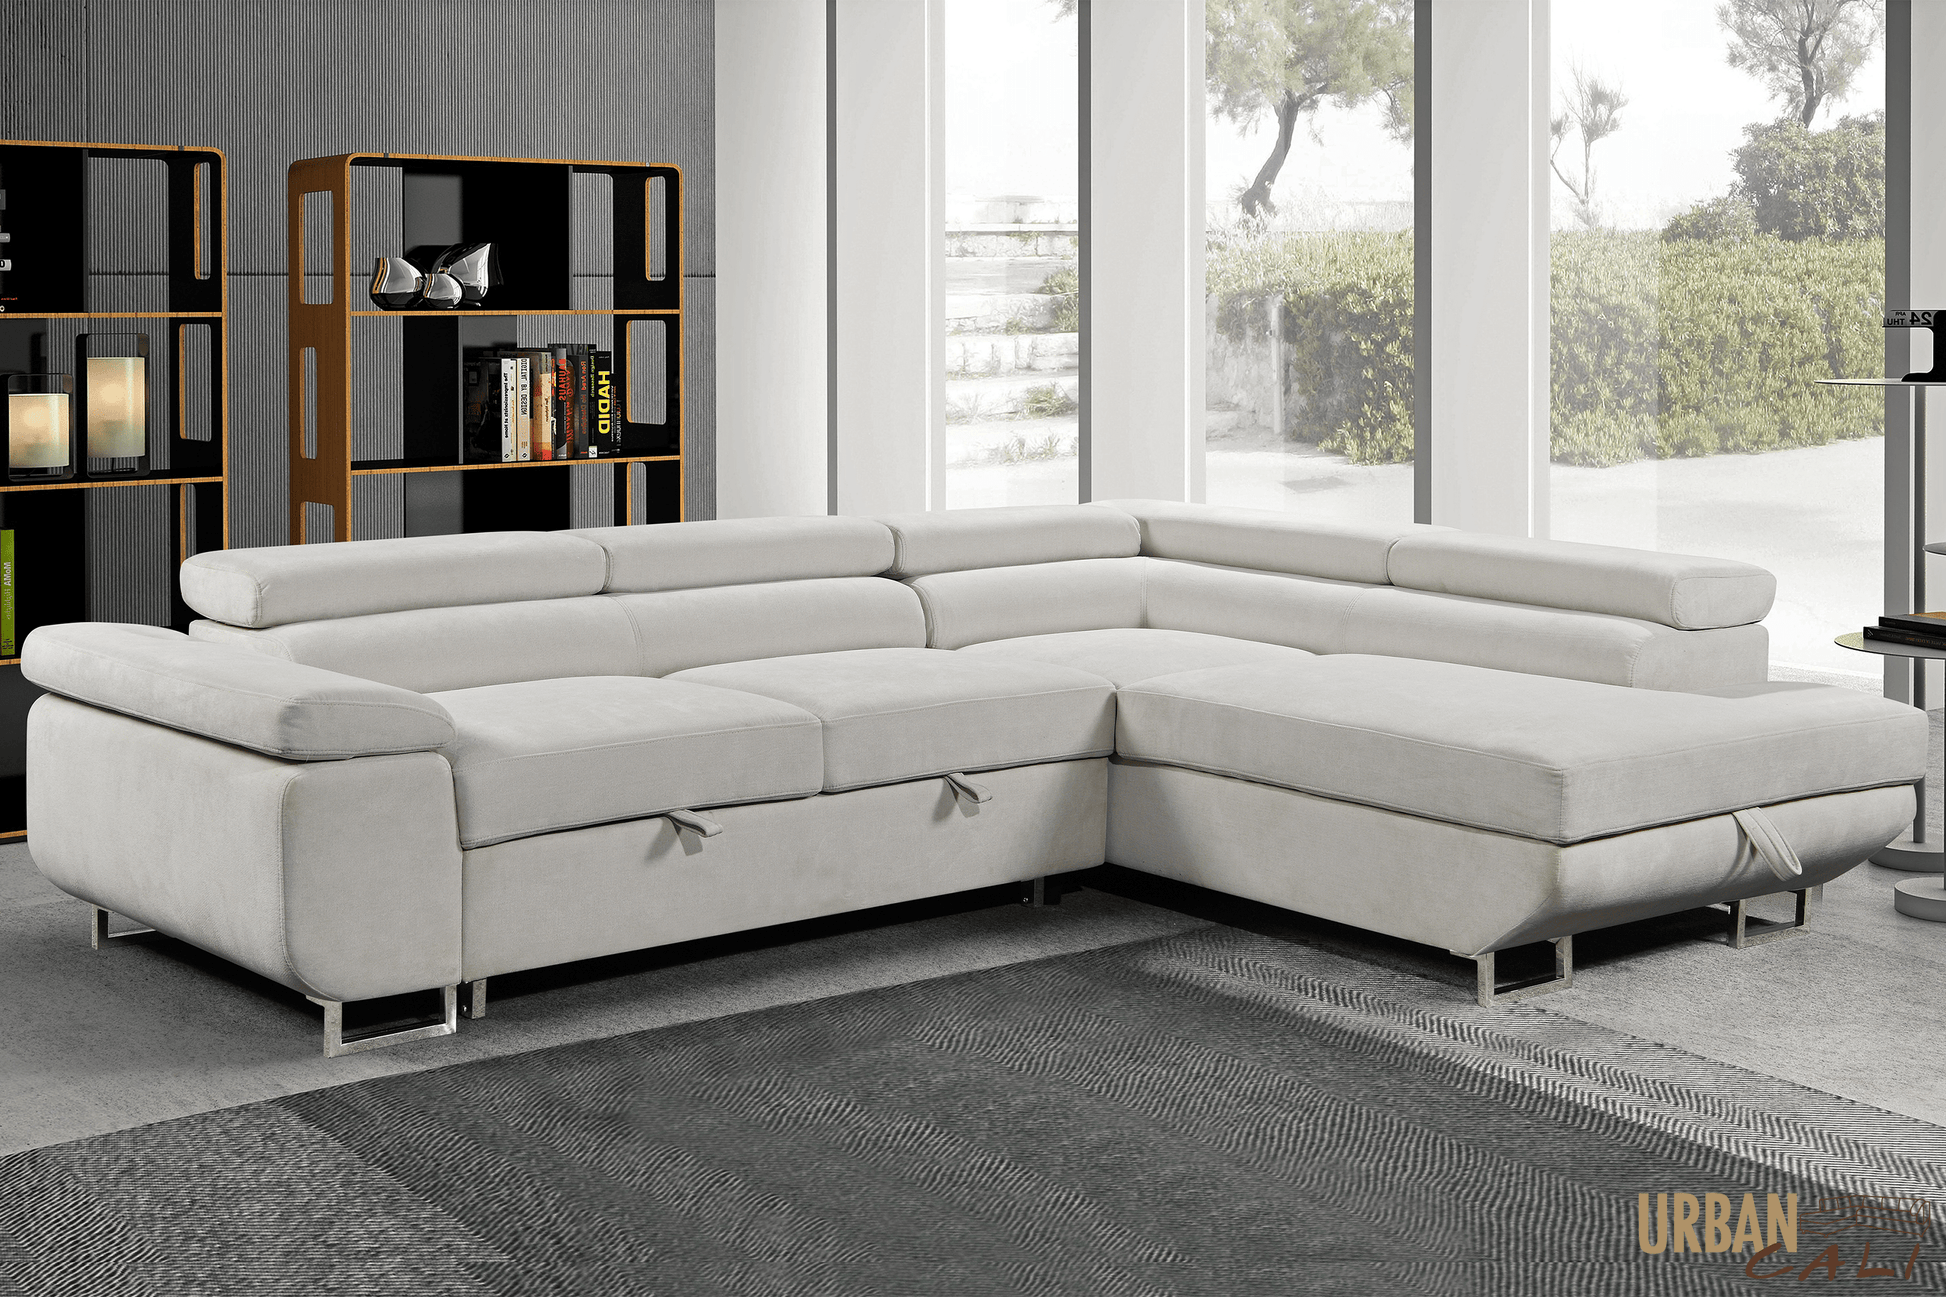 Pending - Urban Cali Right Facing Chaise Hollywood Sleeper Sectional Sofa Bed with Adjustable Headrests and Storage Chaise in Ulani Cream